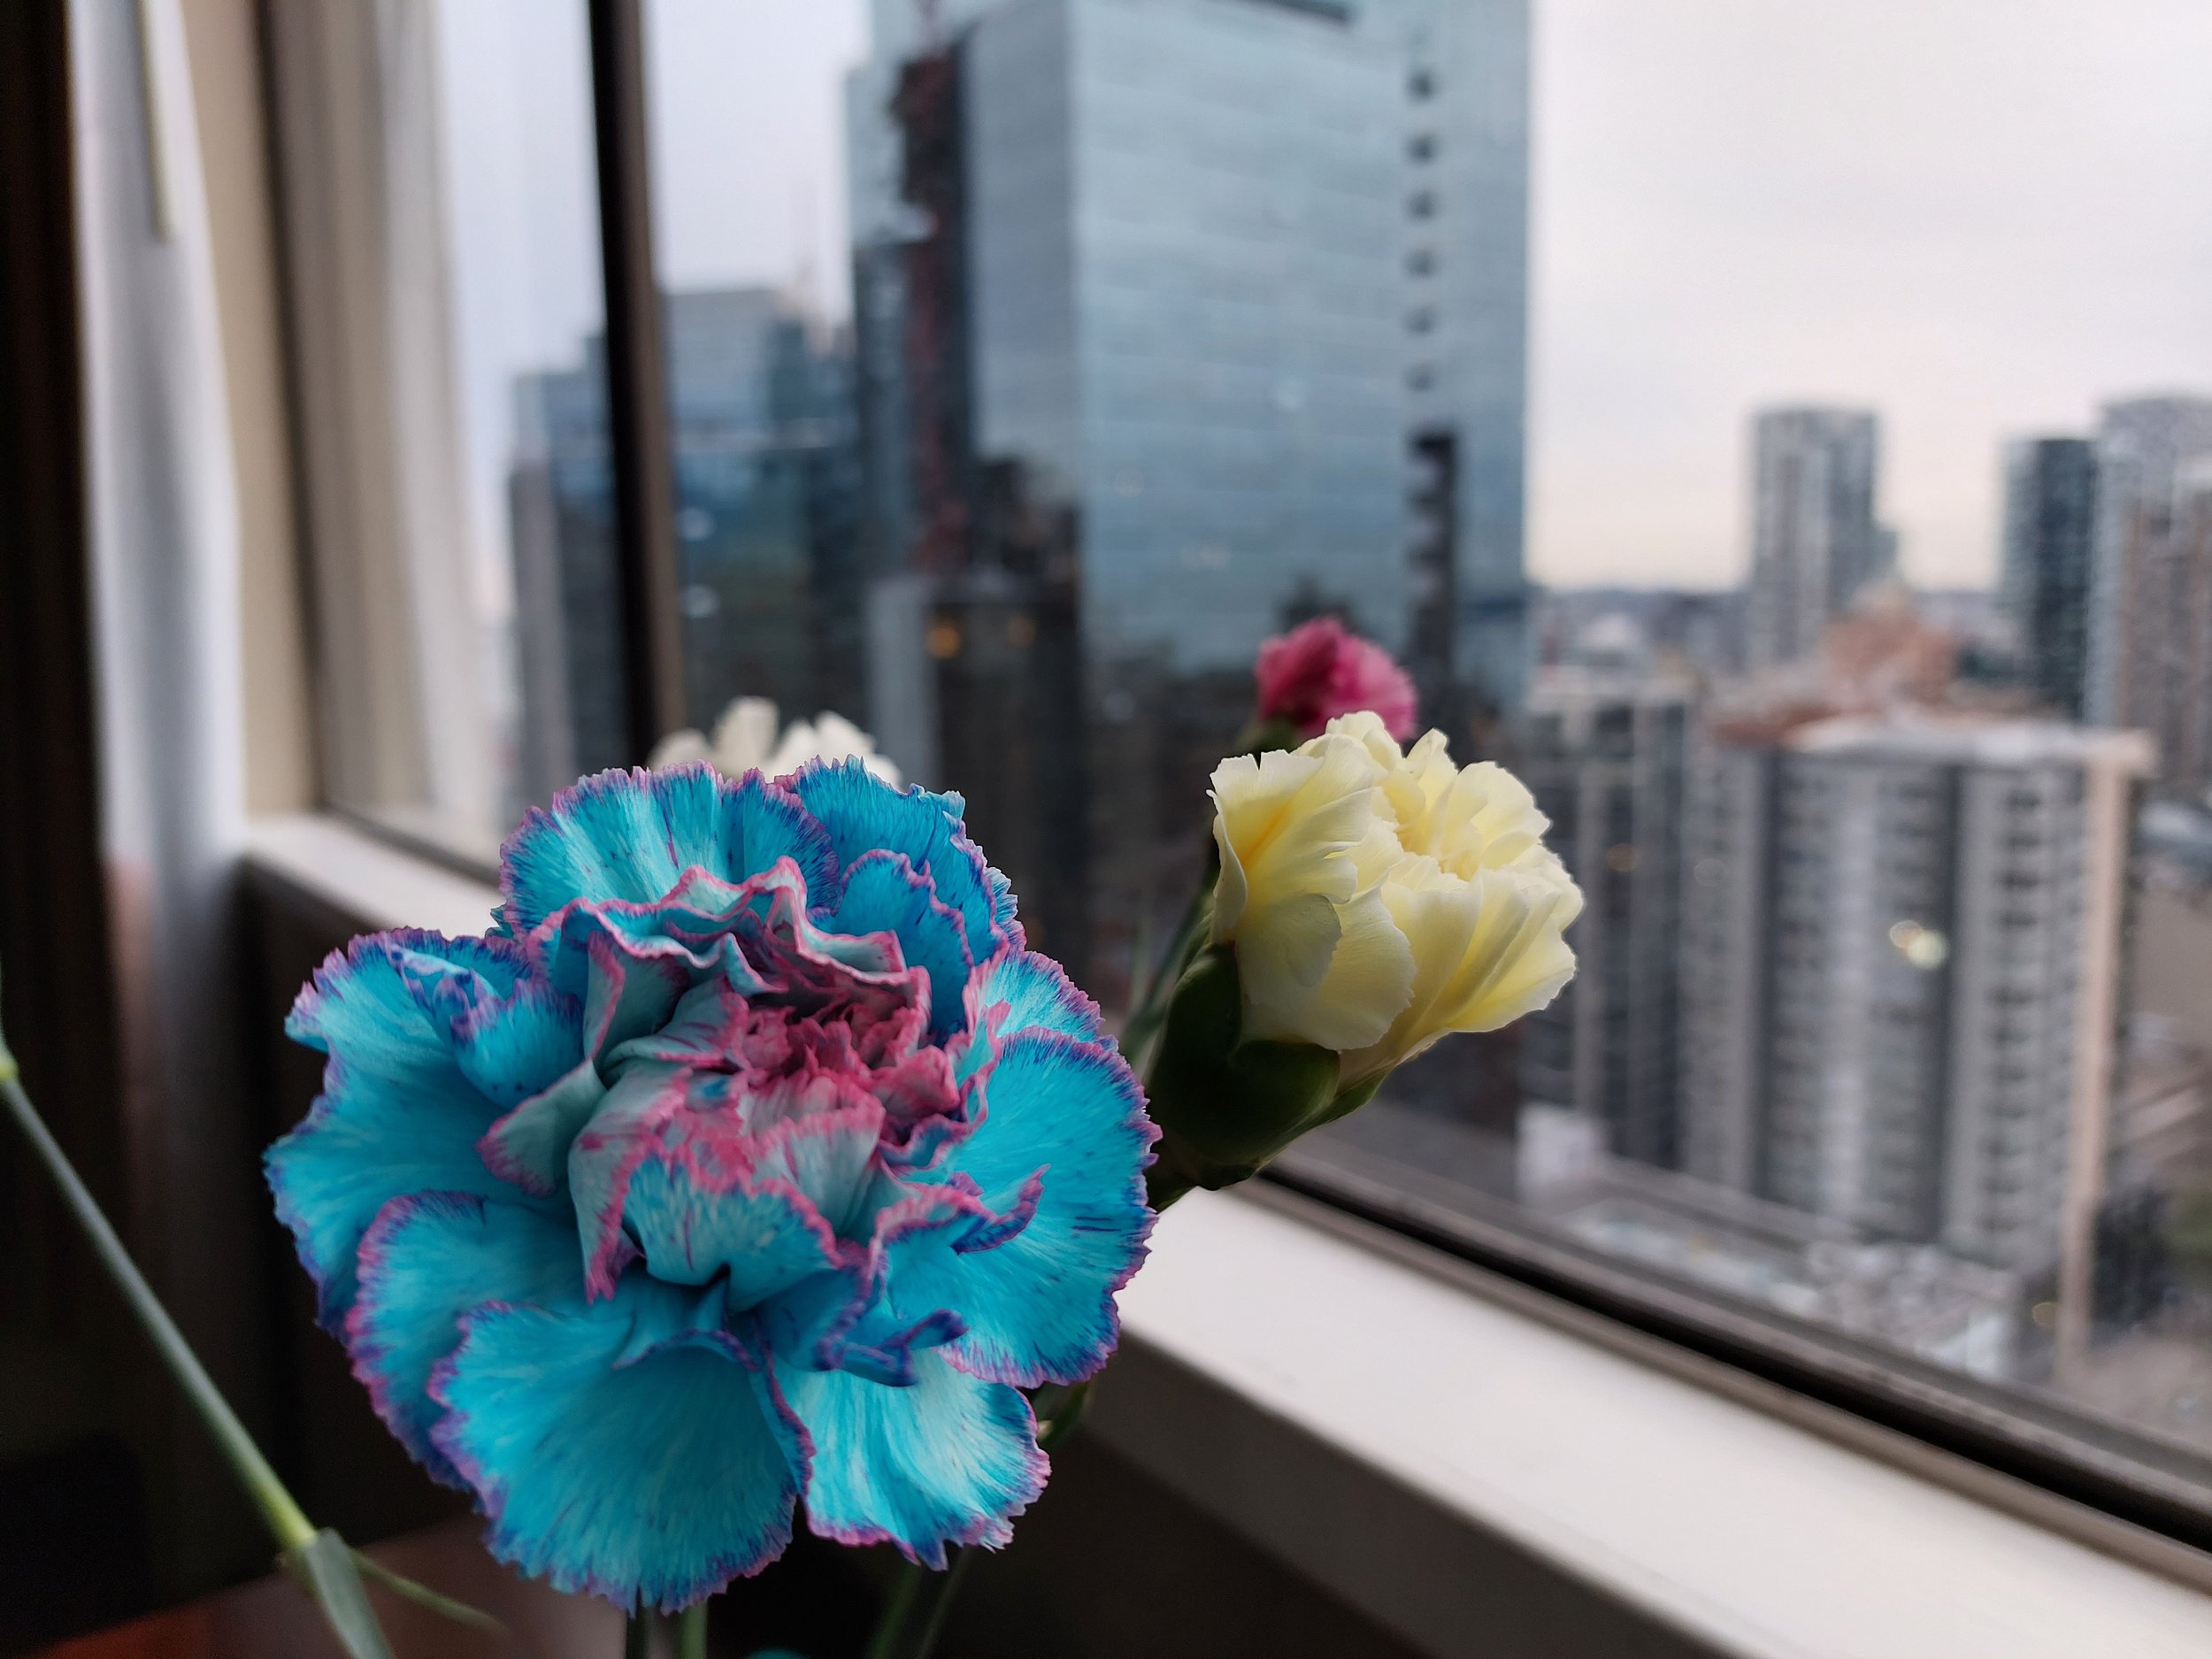 The tradition of flowers in the hotel room